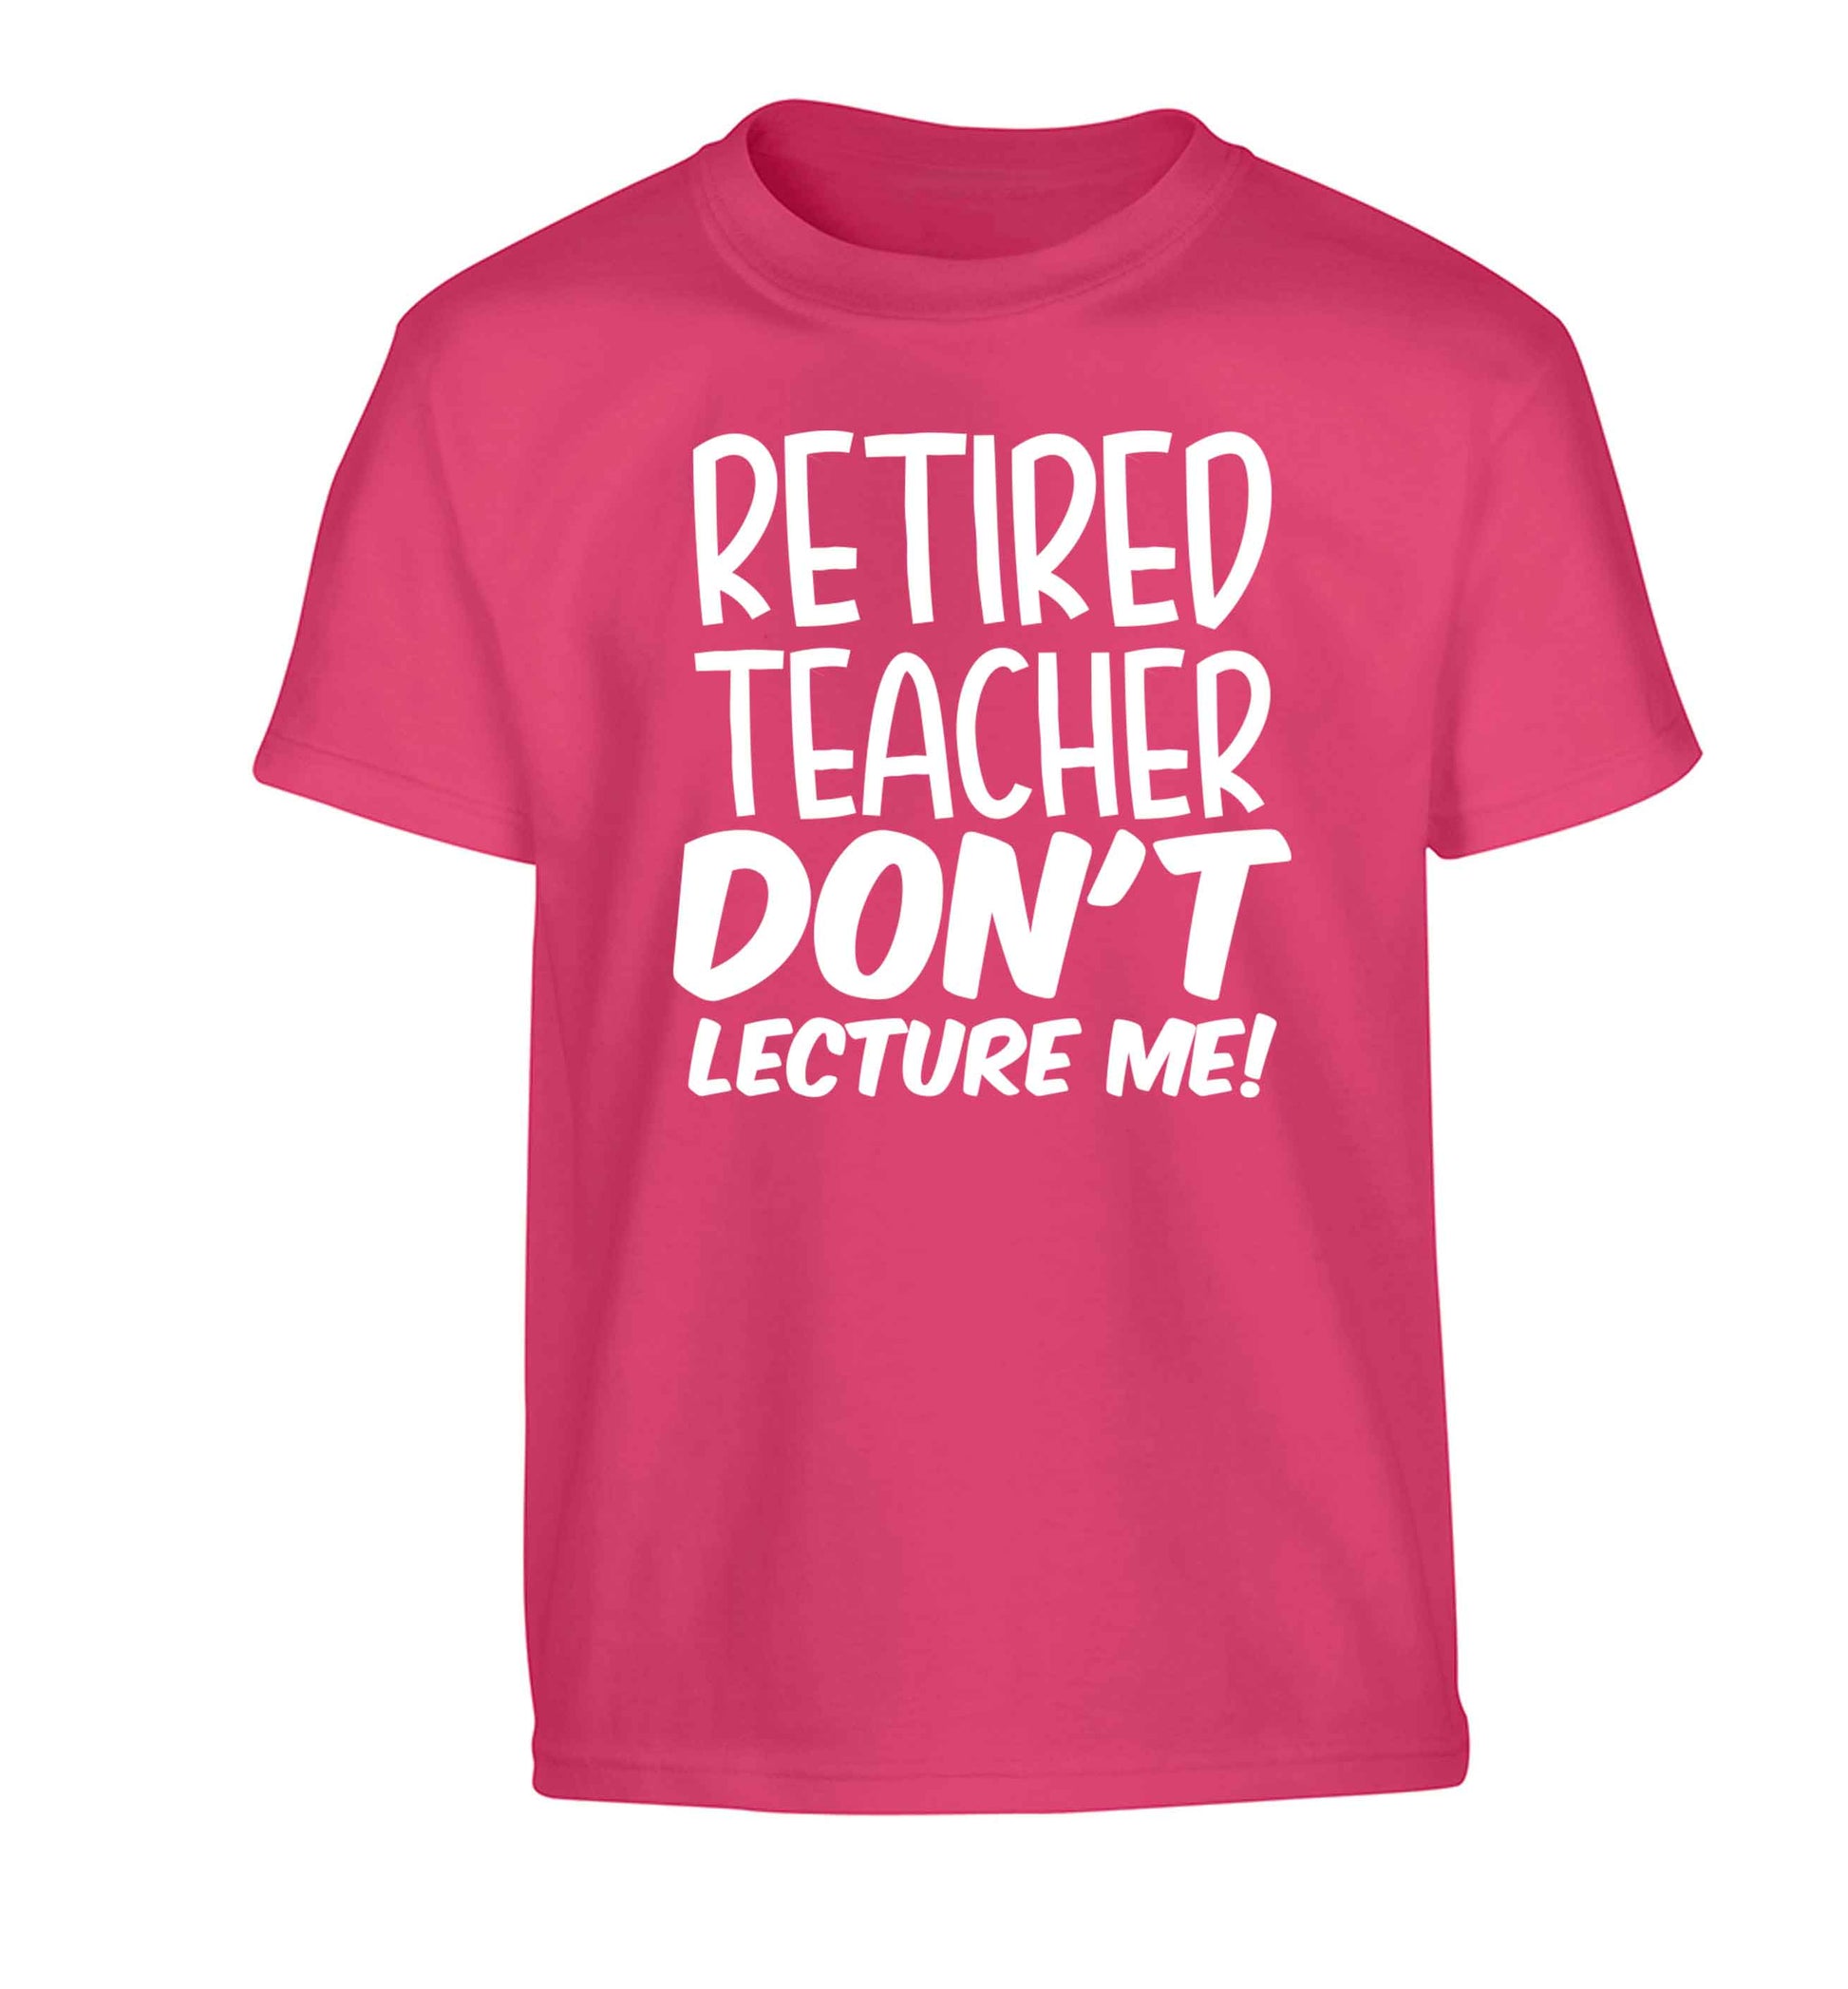 Retired teacher don't lecture me! Children's pink Tshirt 12-13 Years